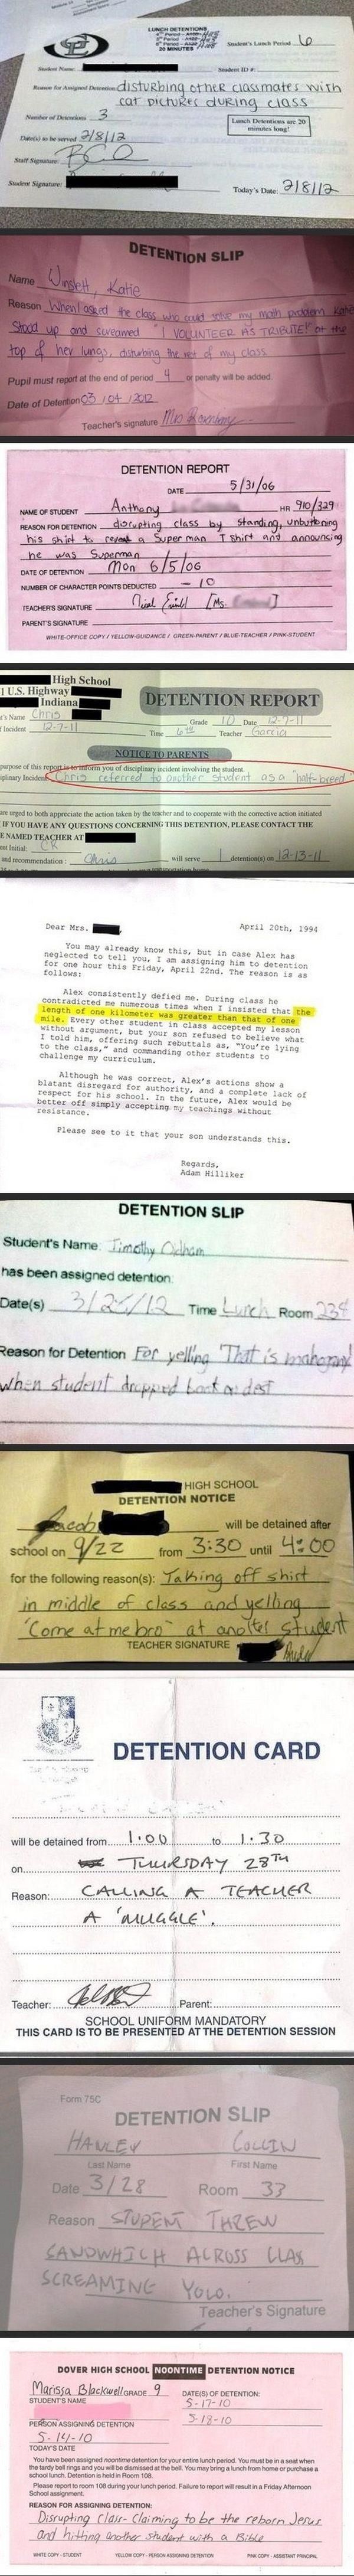 Best reasons to get detention Ever The first student was probably on Reddit 